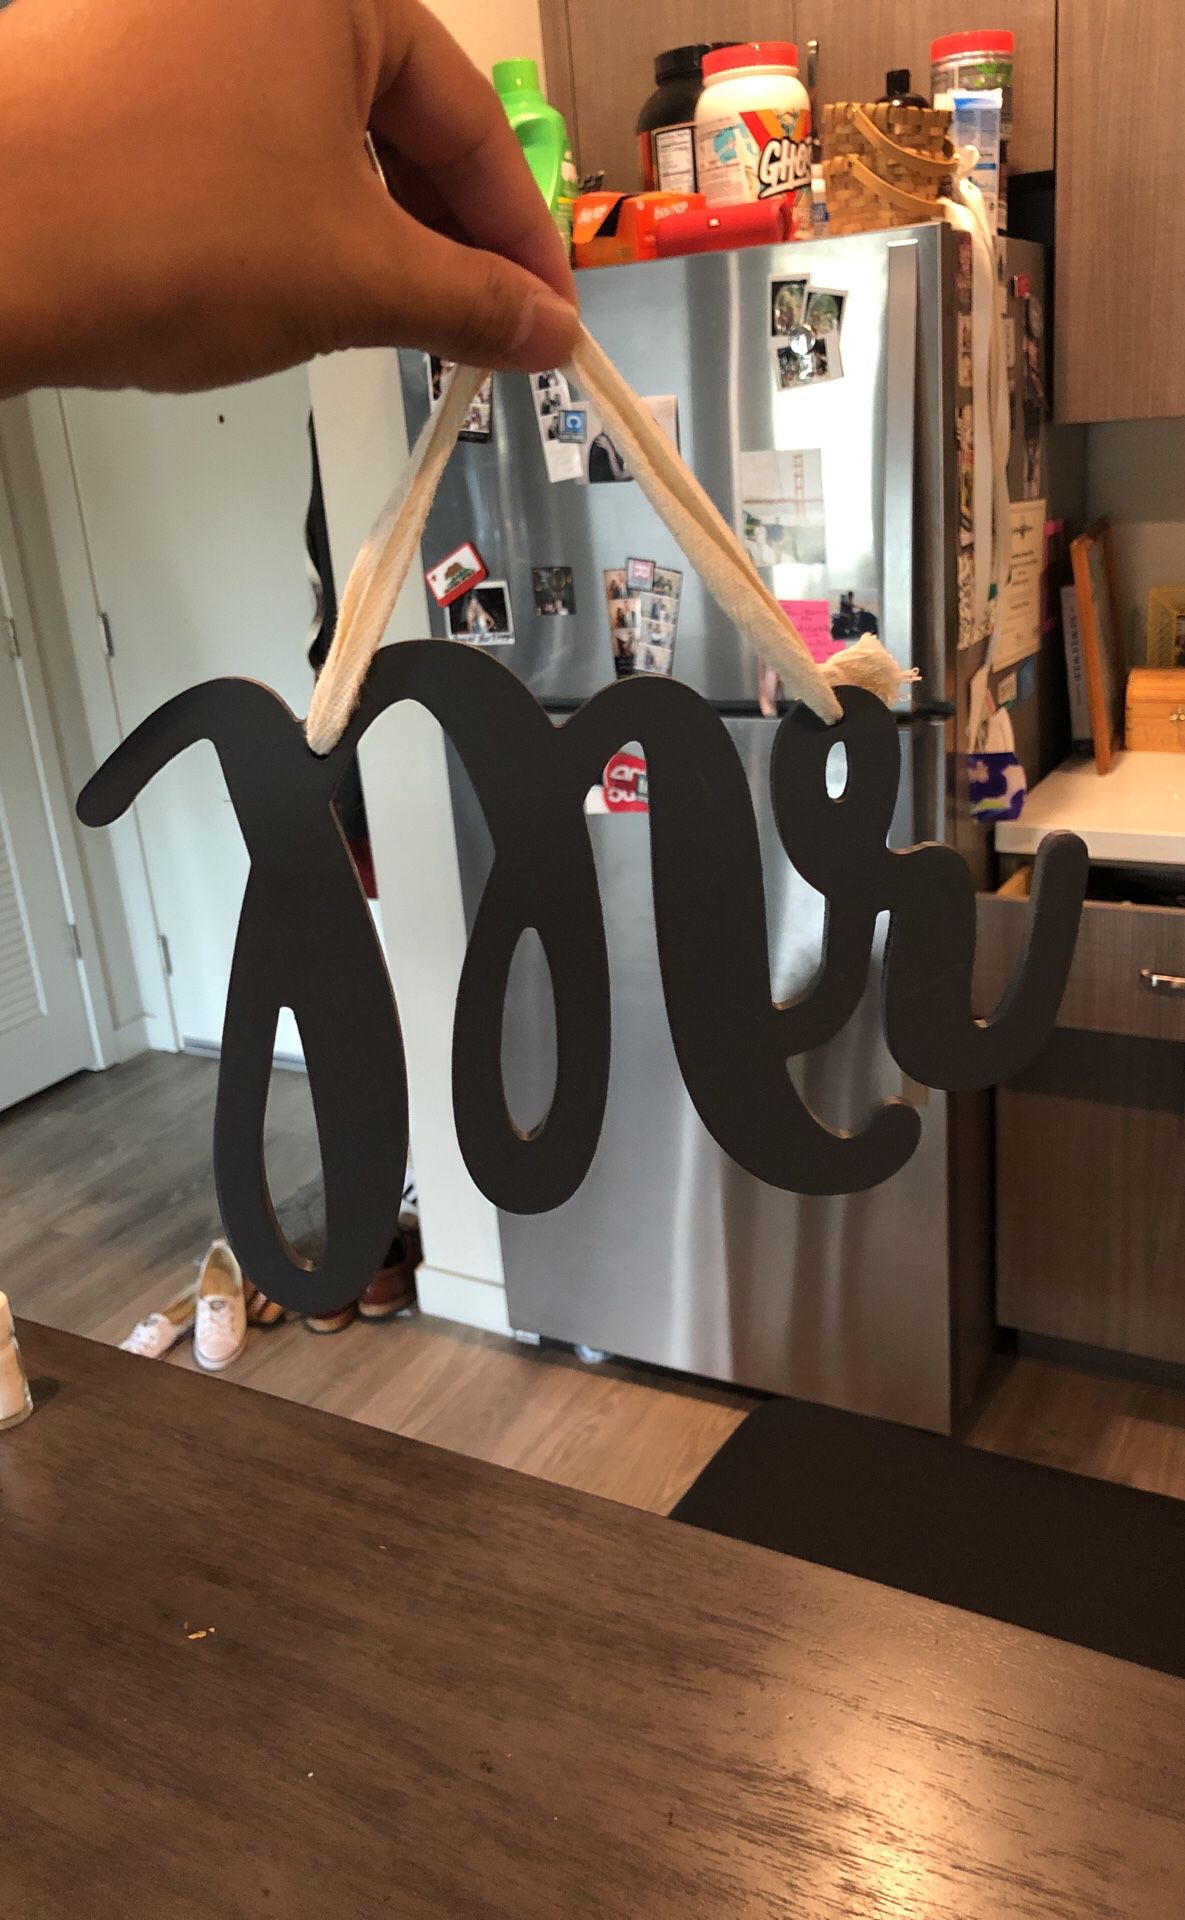 Diy wooden “Mr” and “Mrs” signs